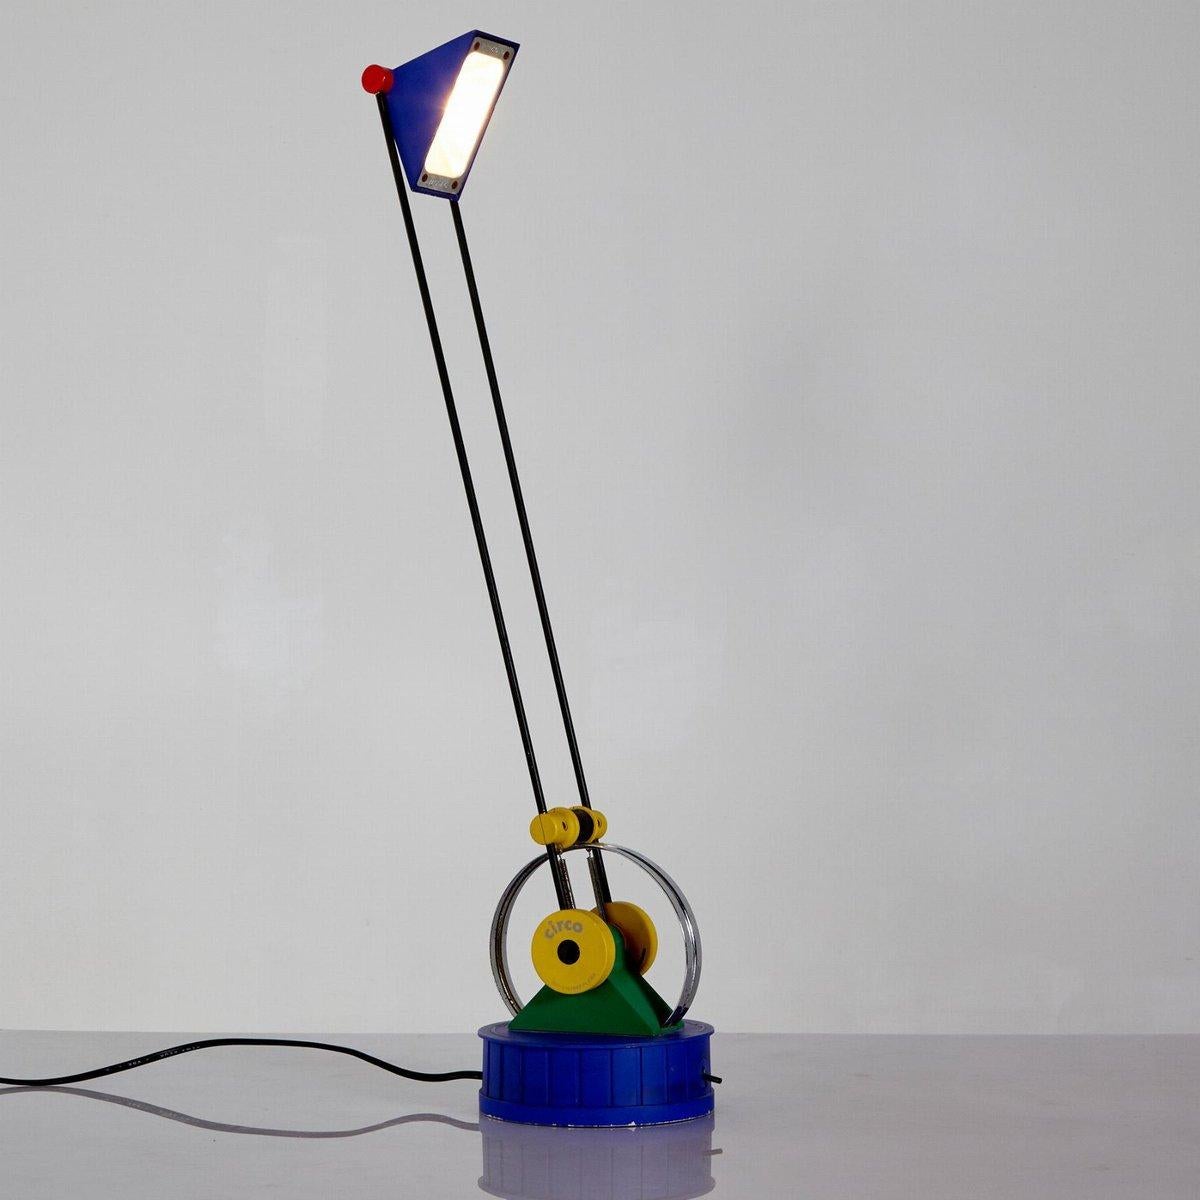 In this listing you will find a beautiful and rare Circo Lamp designed by Linke Plewa for Brilliant Leuchten, Germany. This lamp is a perfect example of Memphis design, featuring all the key colours and the minimalist design of the mentioned style.